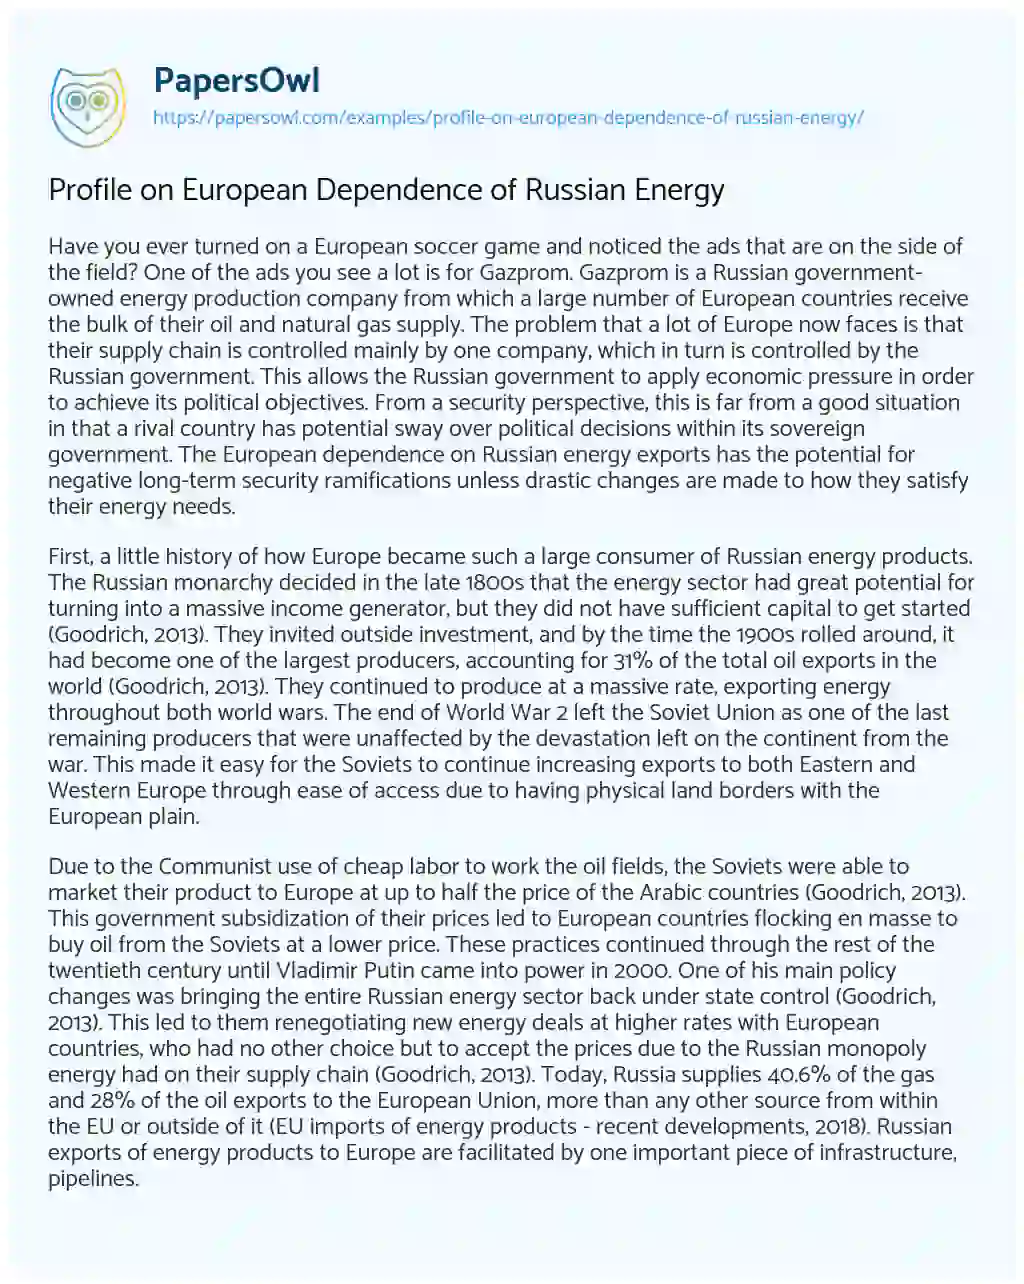 Profile on European Dependence of Russian Energy essay